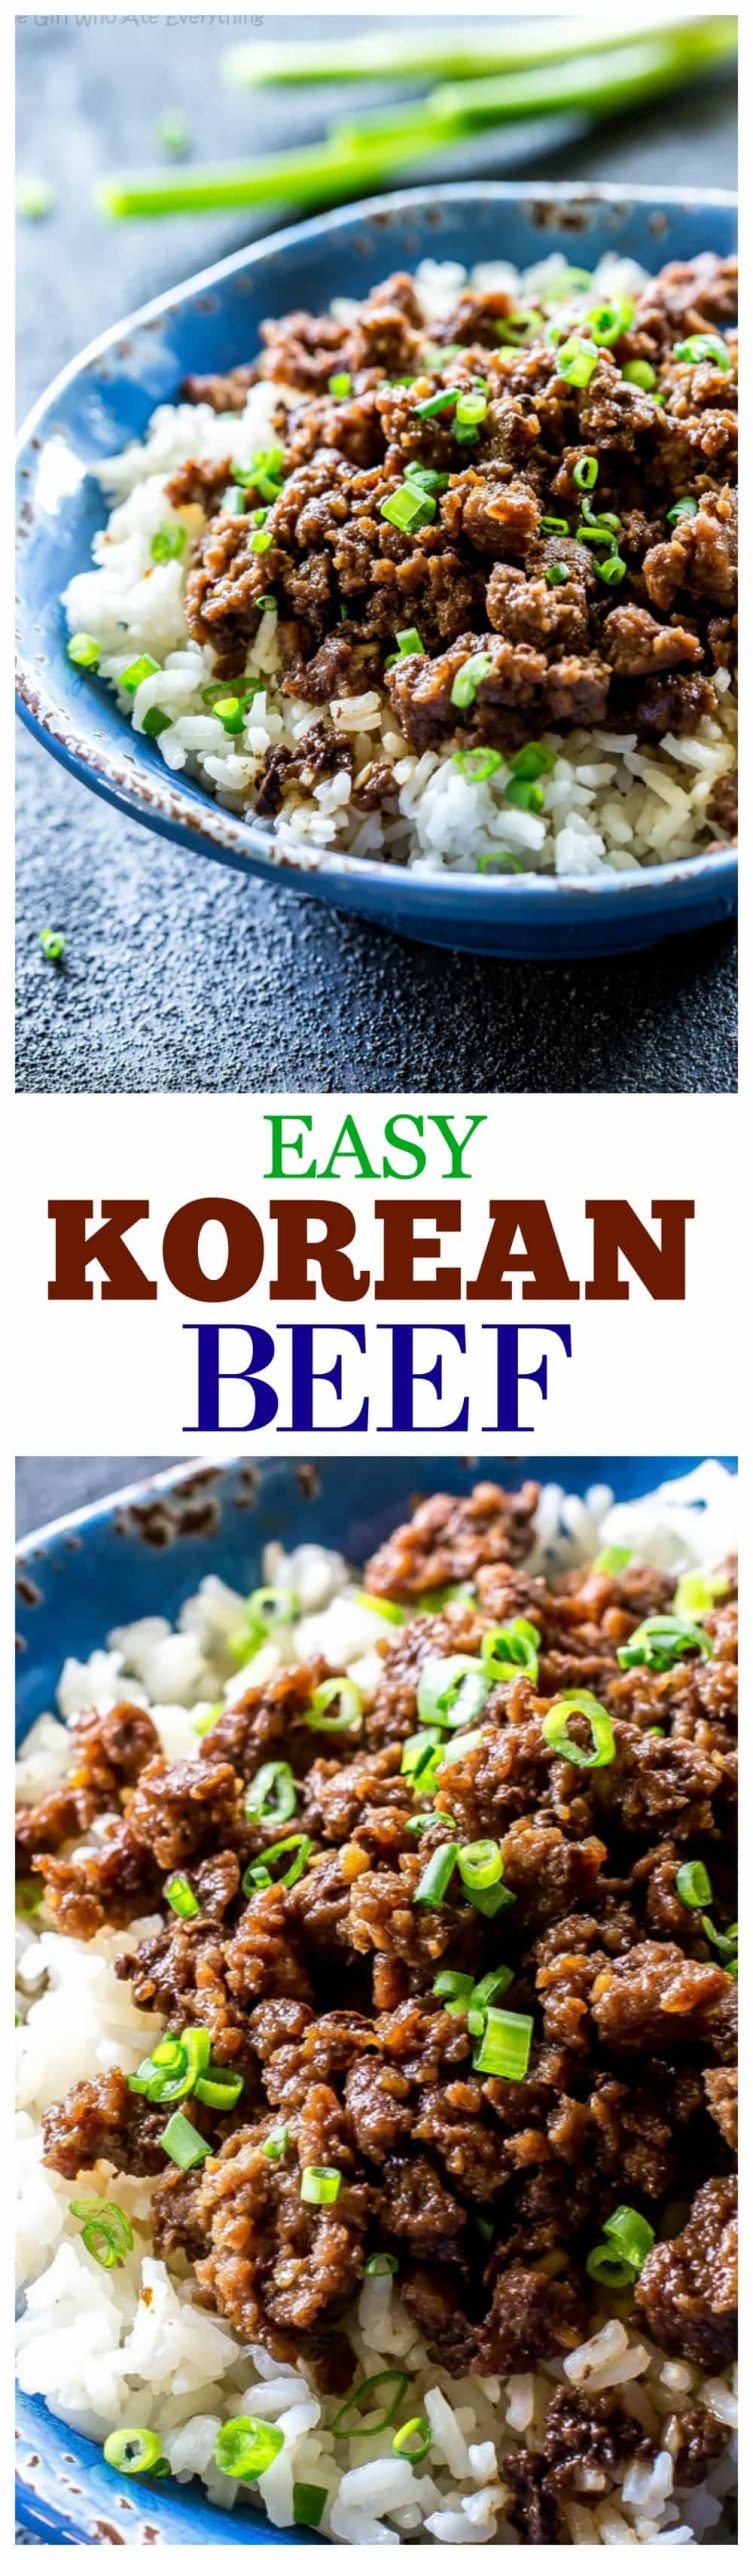 Korean Beef Bowl - a quick version of the classic served over rice or in lettuce wraps for a low-carb option. #korean #beef #easy #dinner #recipe